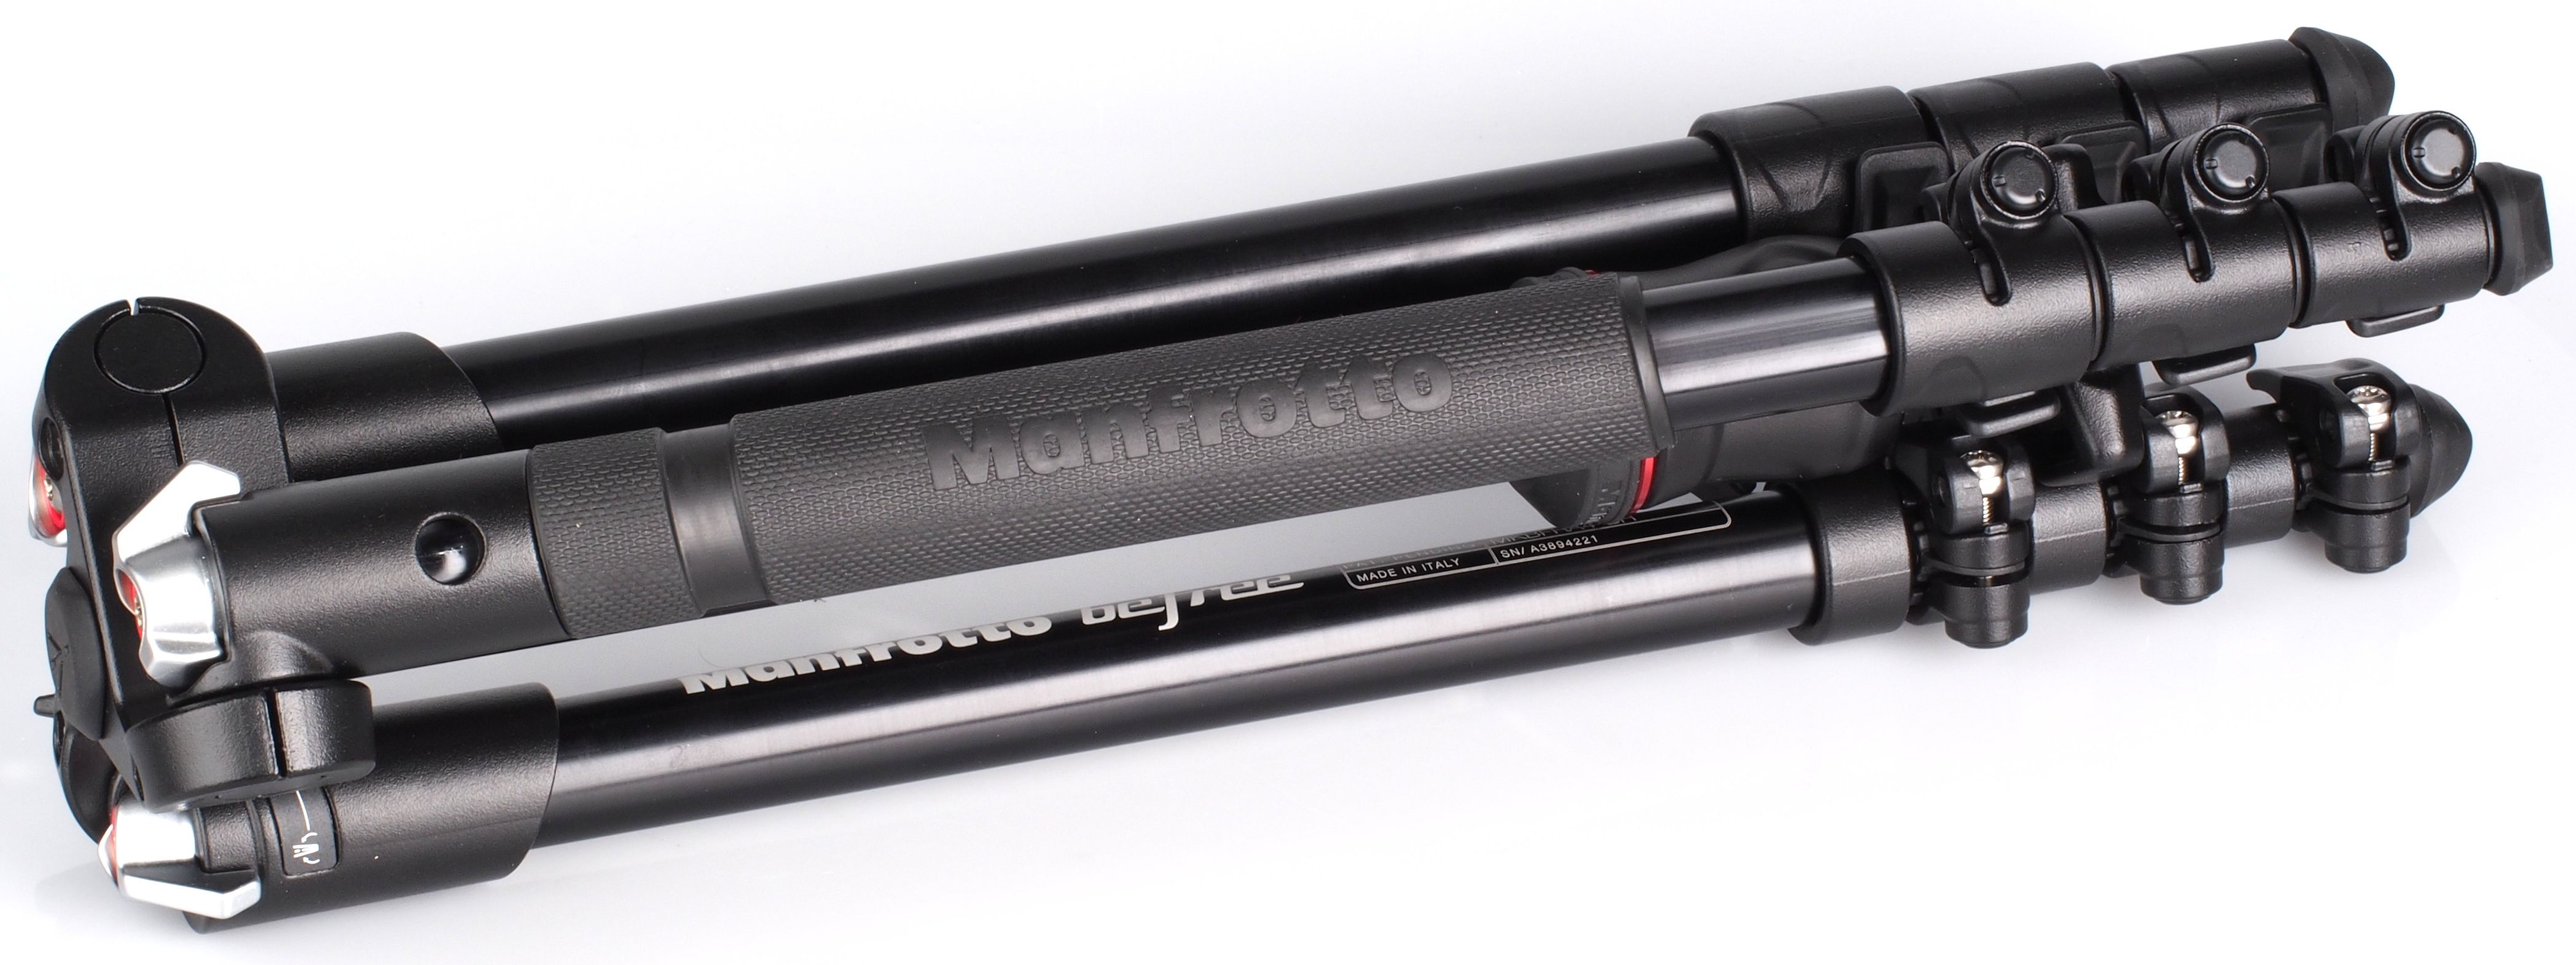 Highres Manfrotto Befree Tripod Mkbfr A4 Bh 3 1372345628